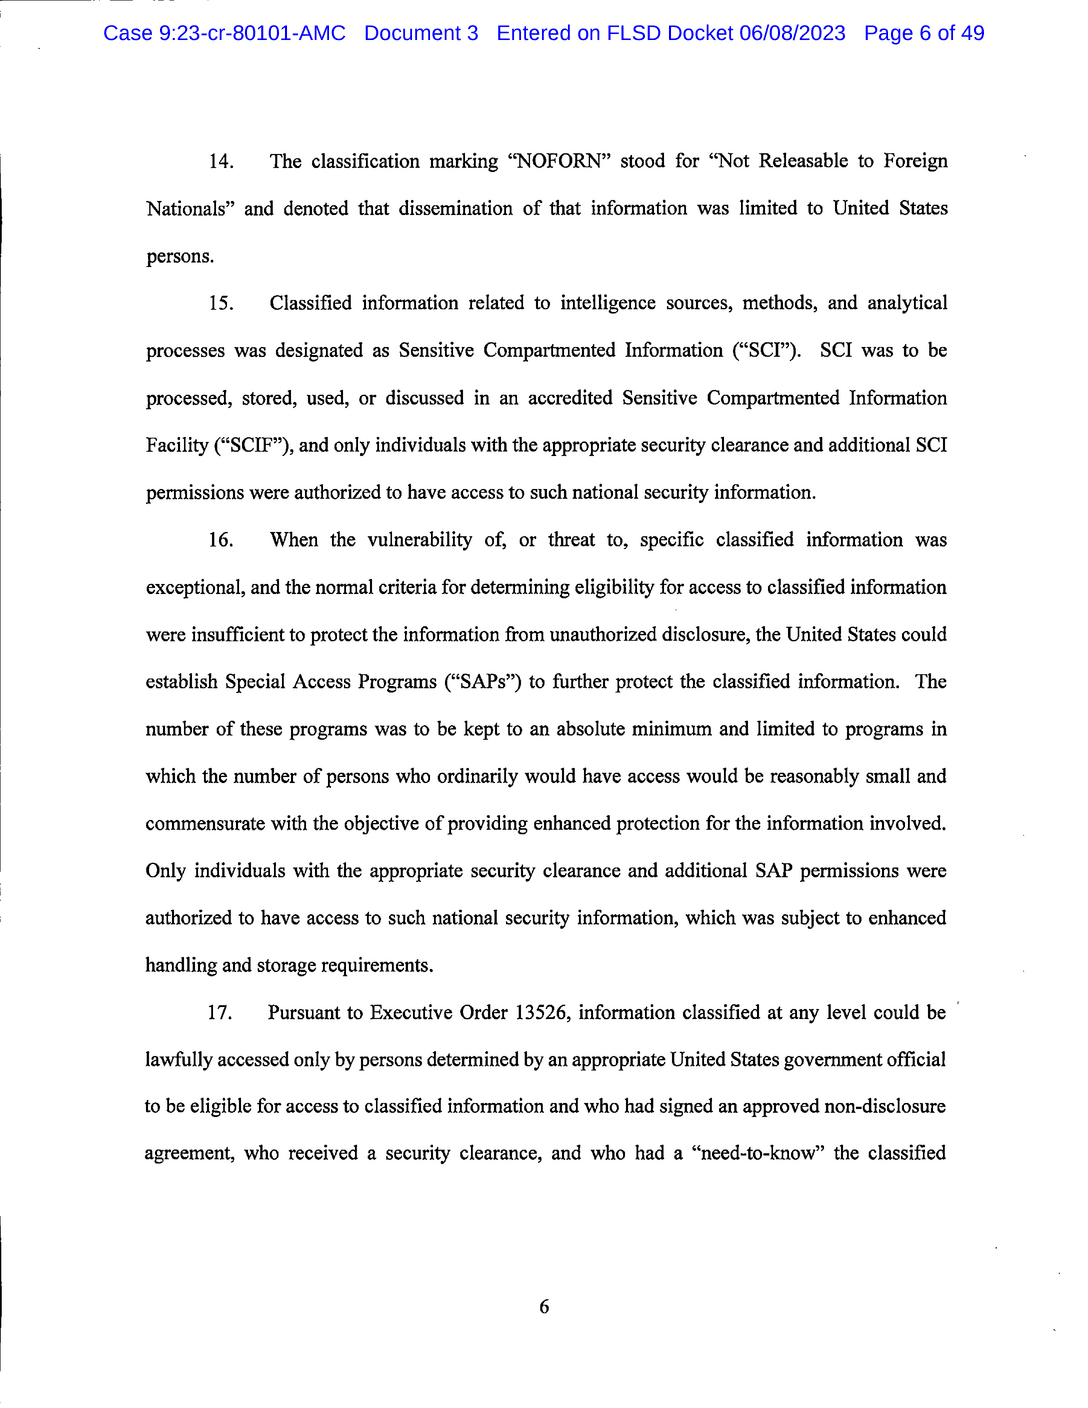 Page 6 of Donald Trump Classified Documents Indictment PDF document.